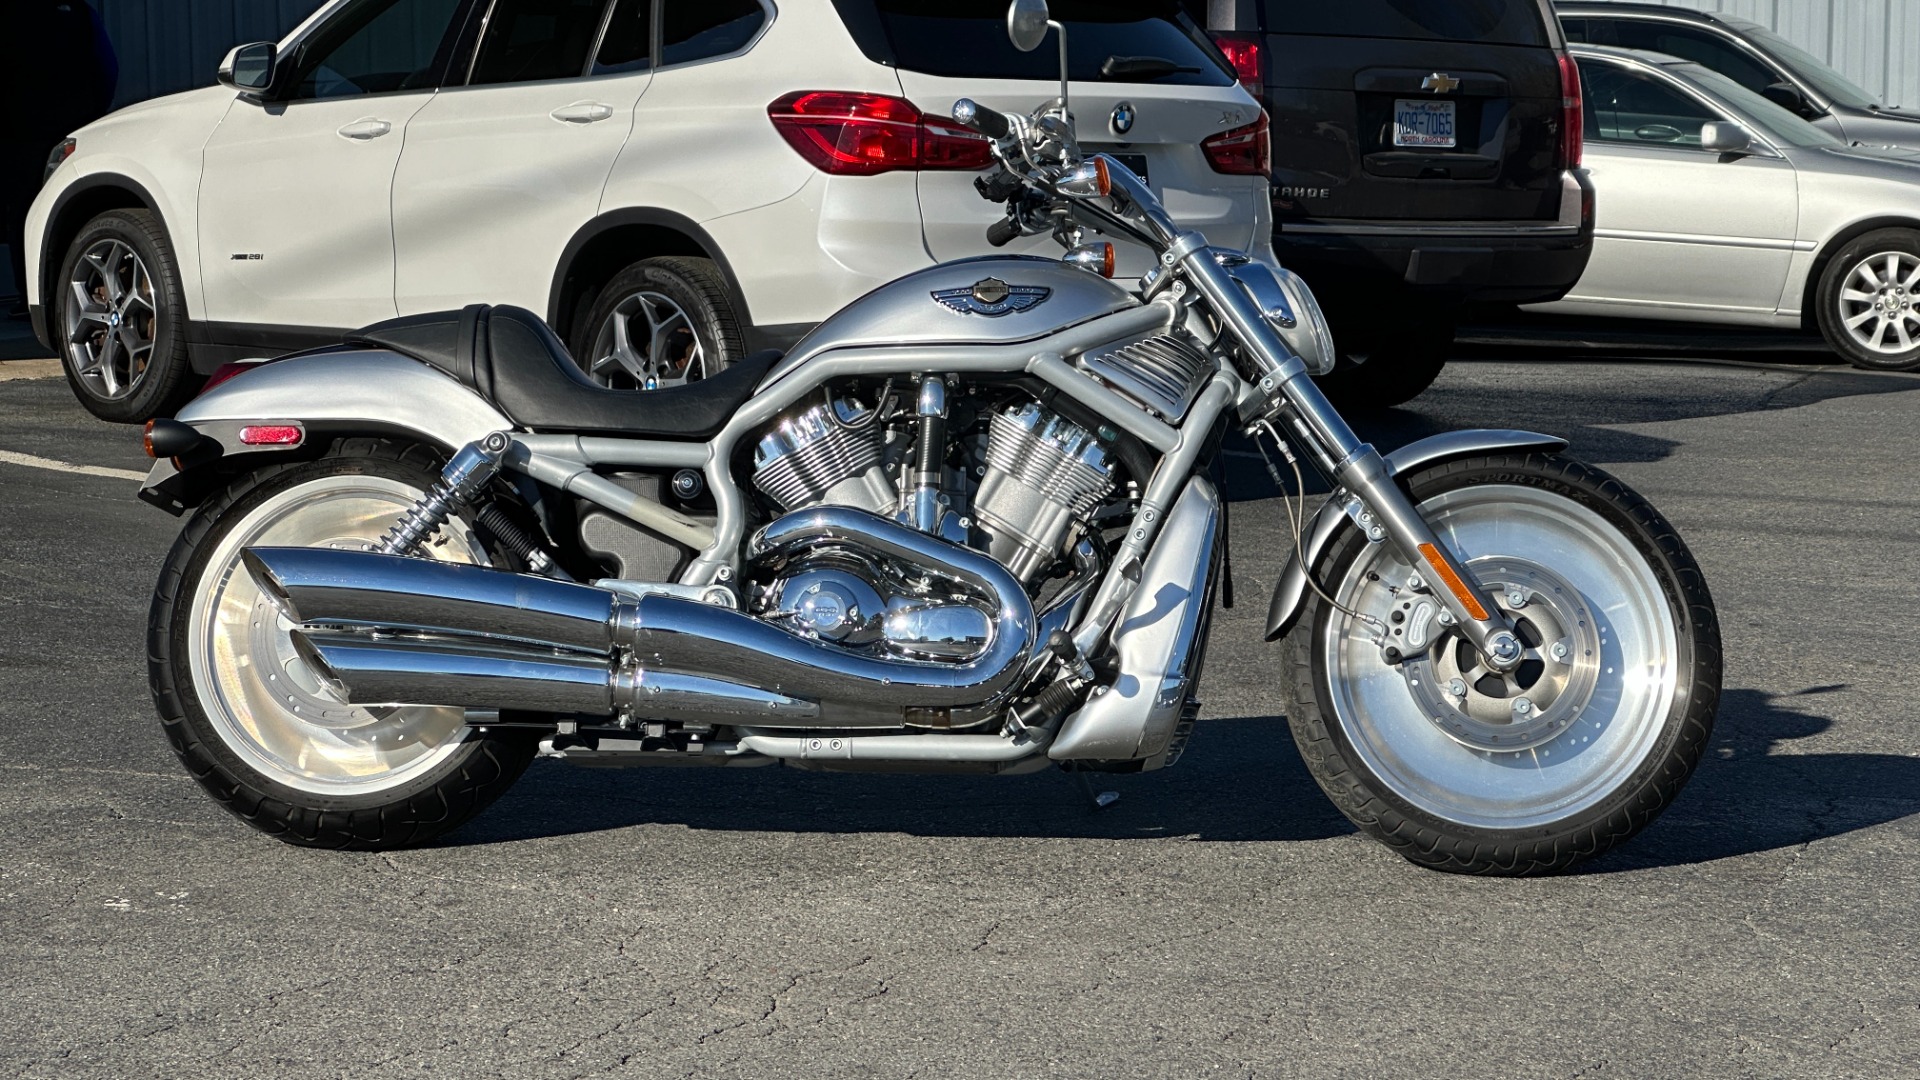 Used 2003 Harley Davidson V Rod ANNIVERSARY EDITION / 1130CC ENGINE / BREMBO BRAKES / VORTEX AIR SCOOPS for sale $7,995 at Formula Imports in Charlotte NC 28227 52